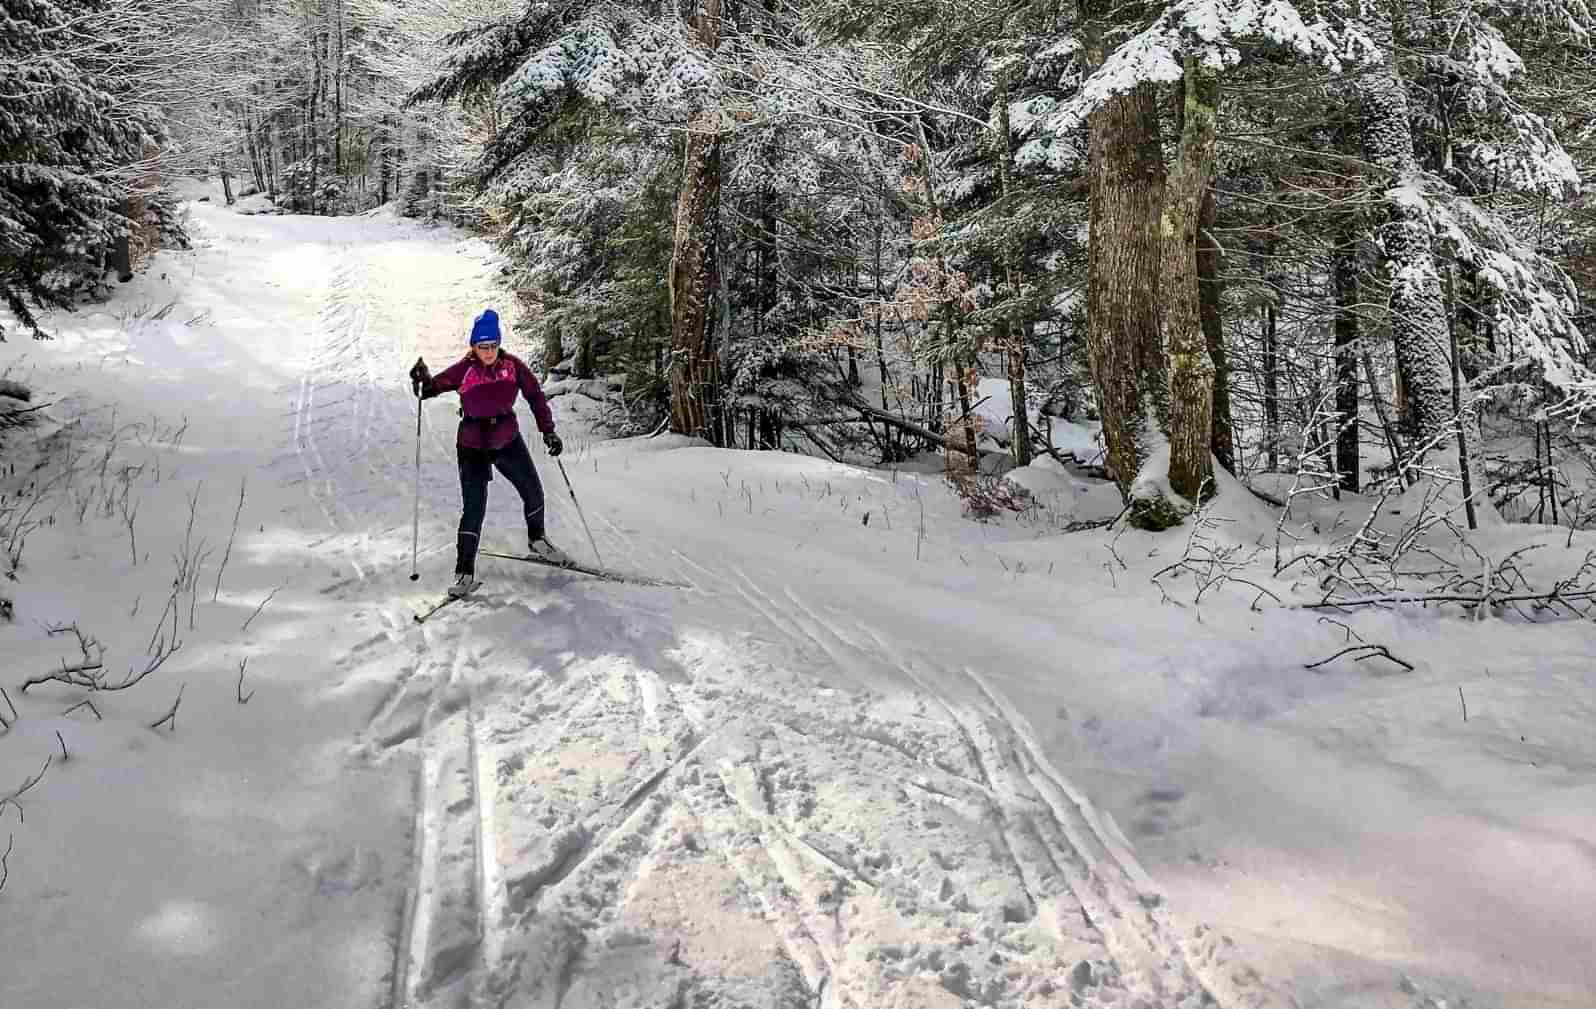 Woman cross country skiing on snowy path between trees